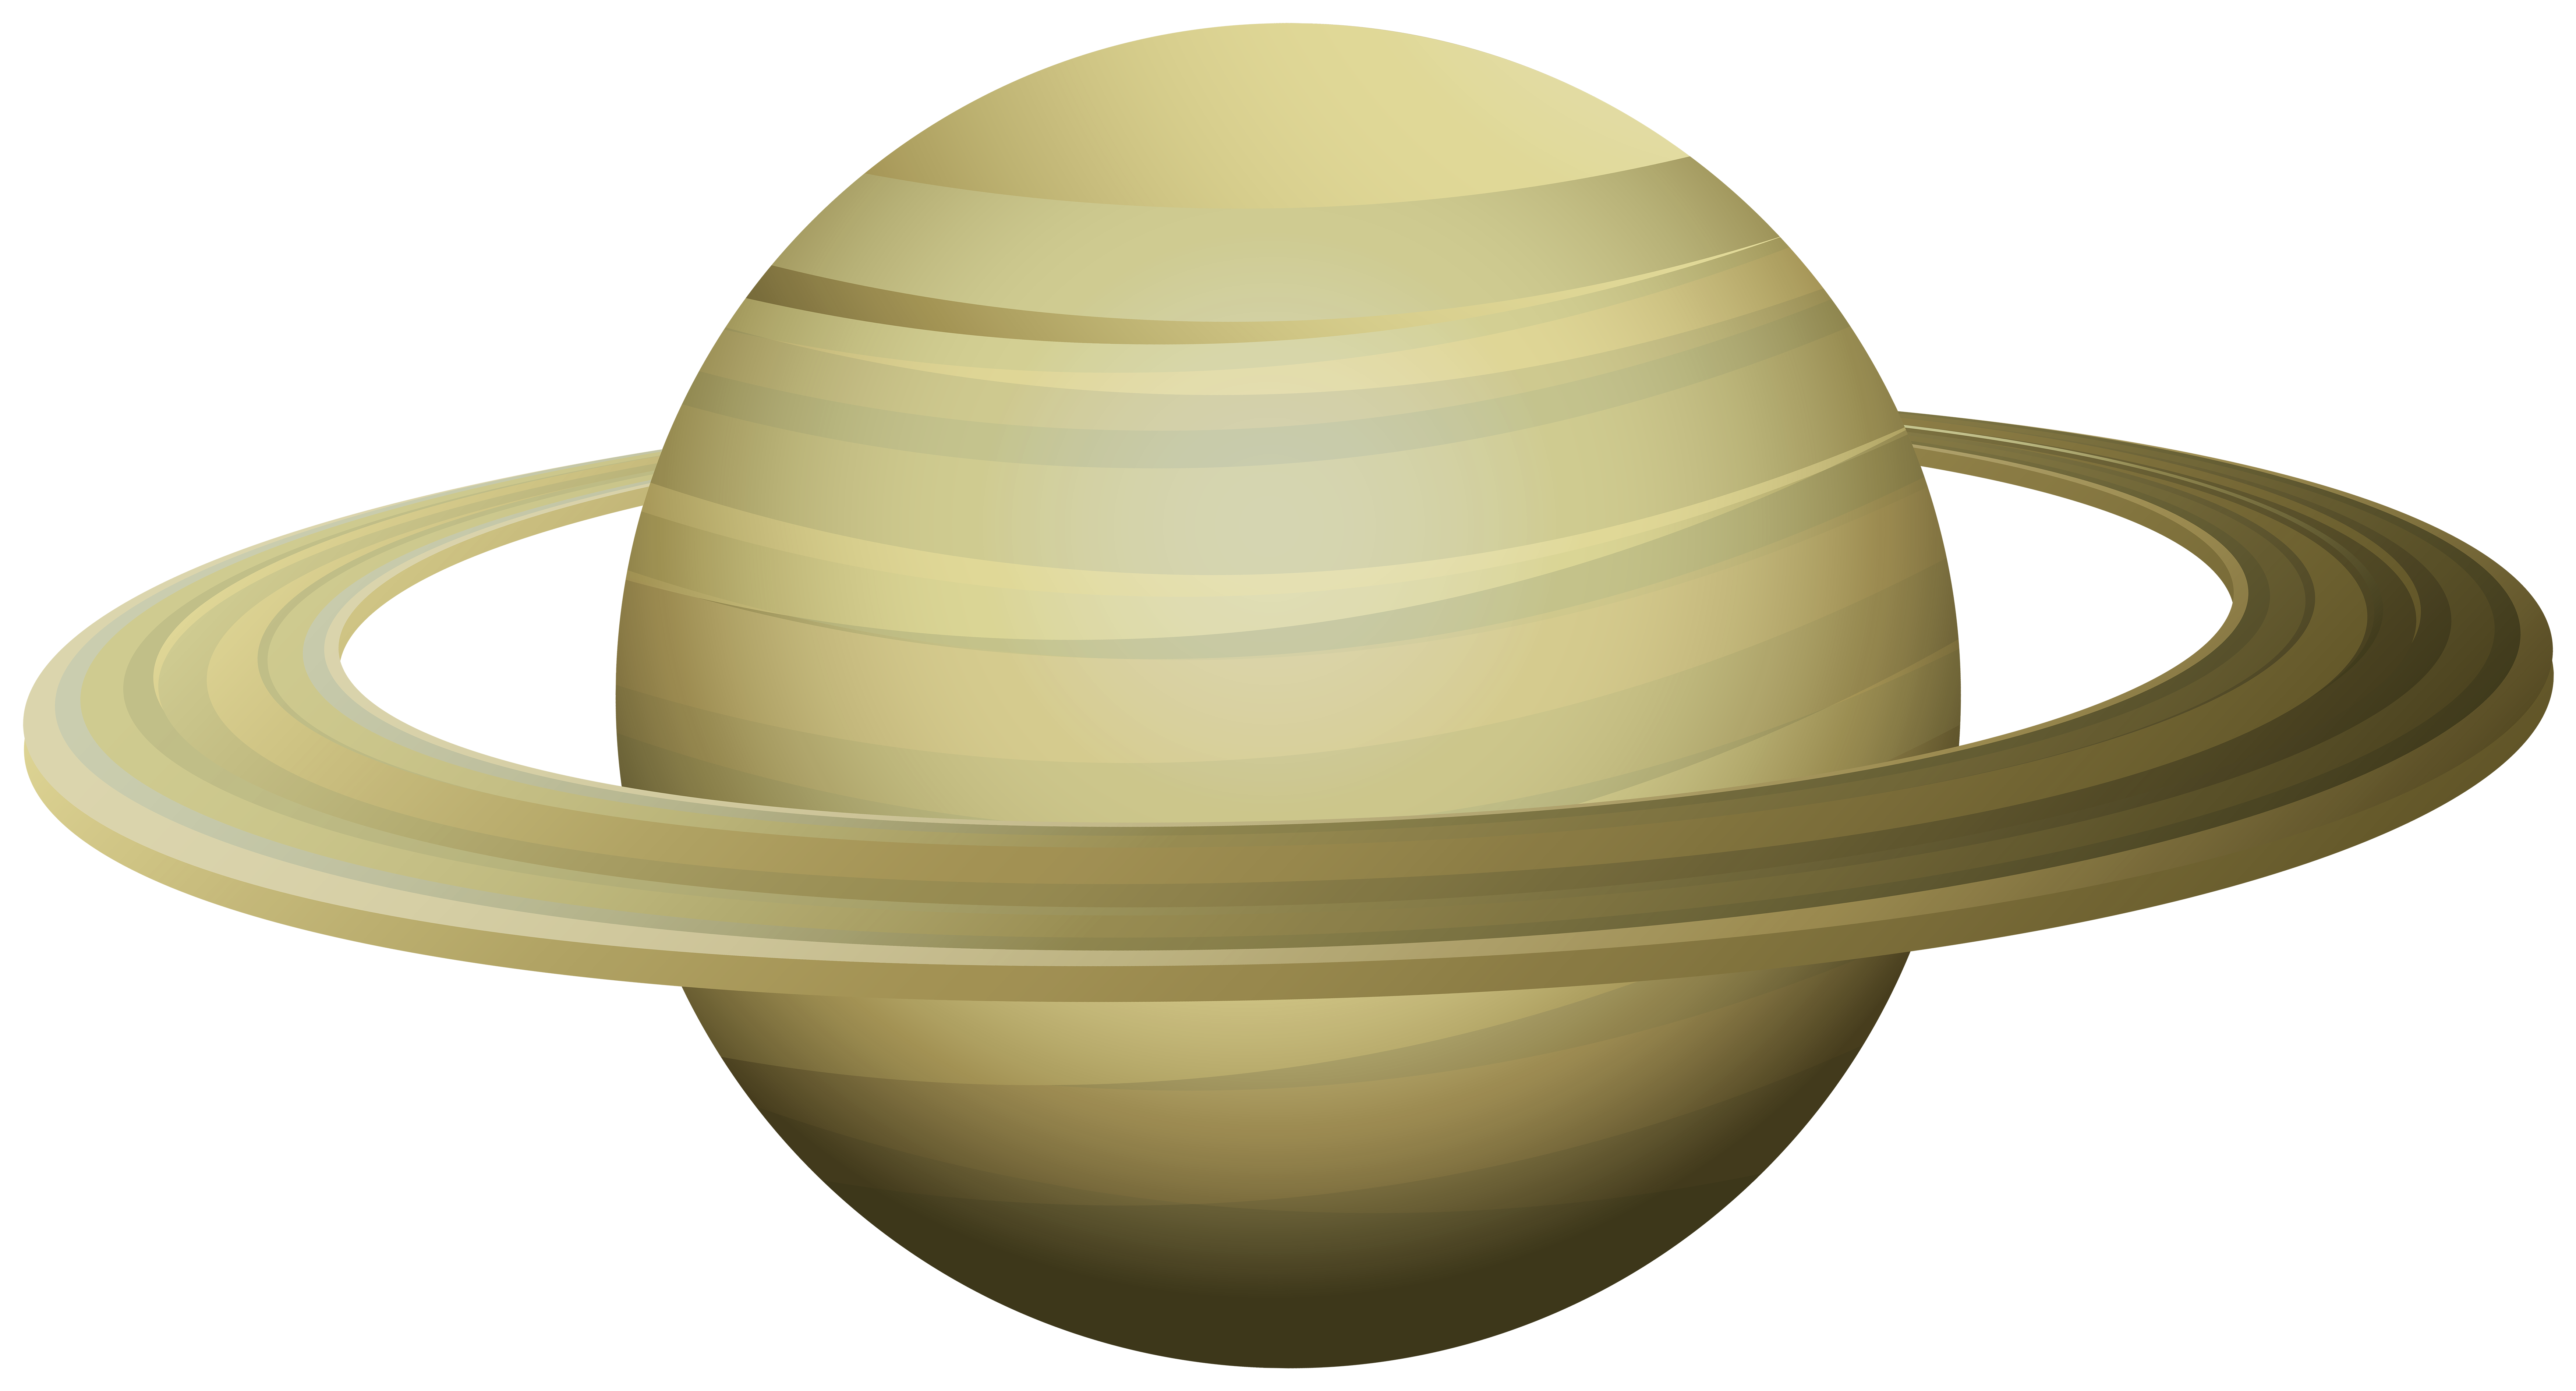 planets clipart realistic